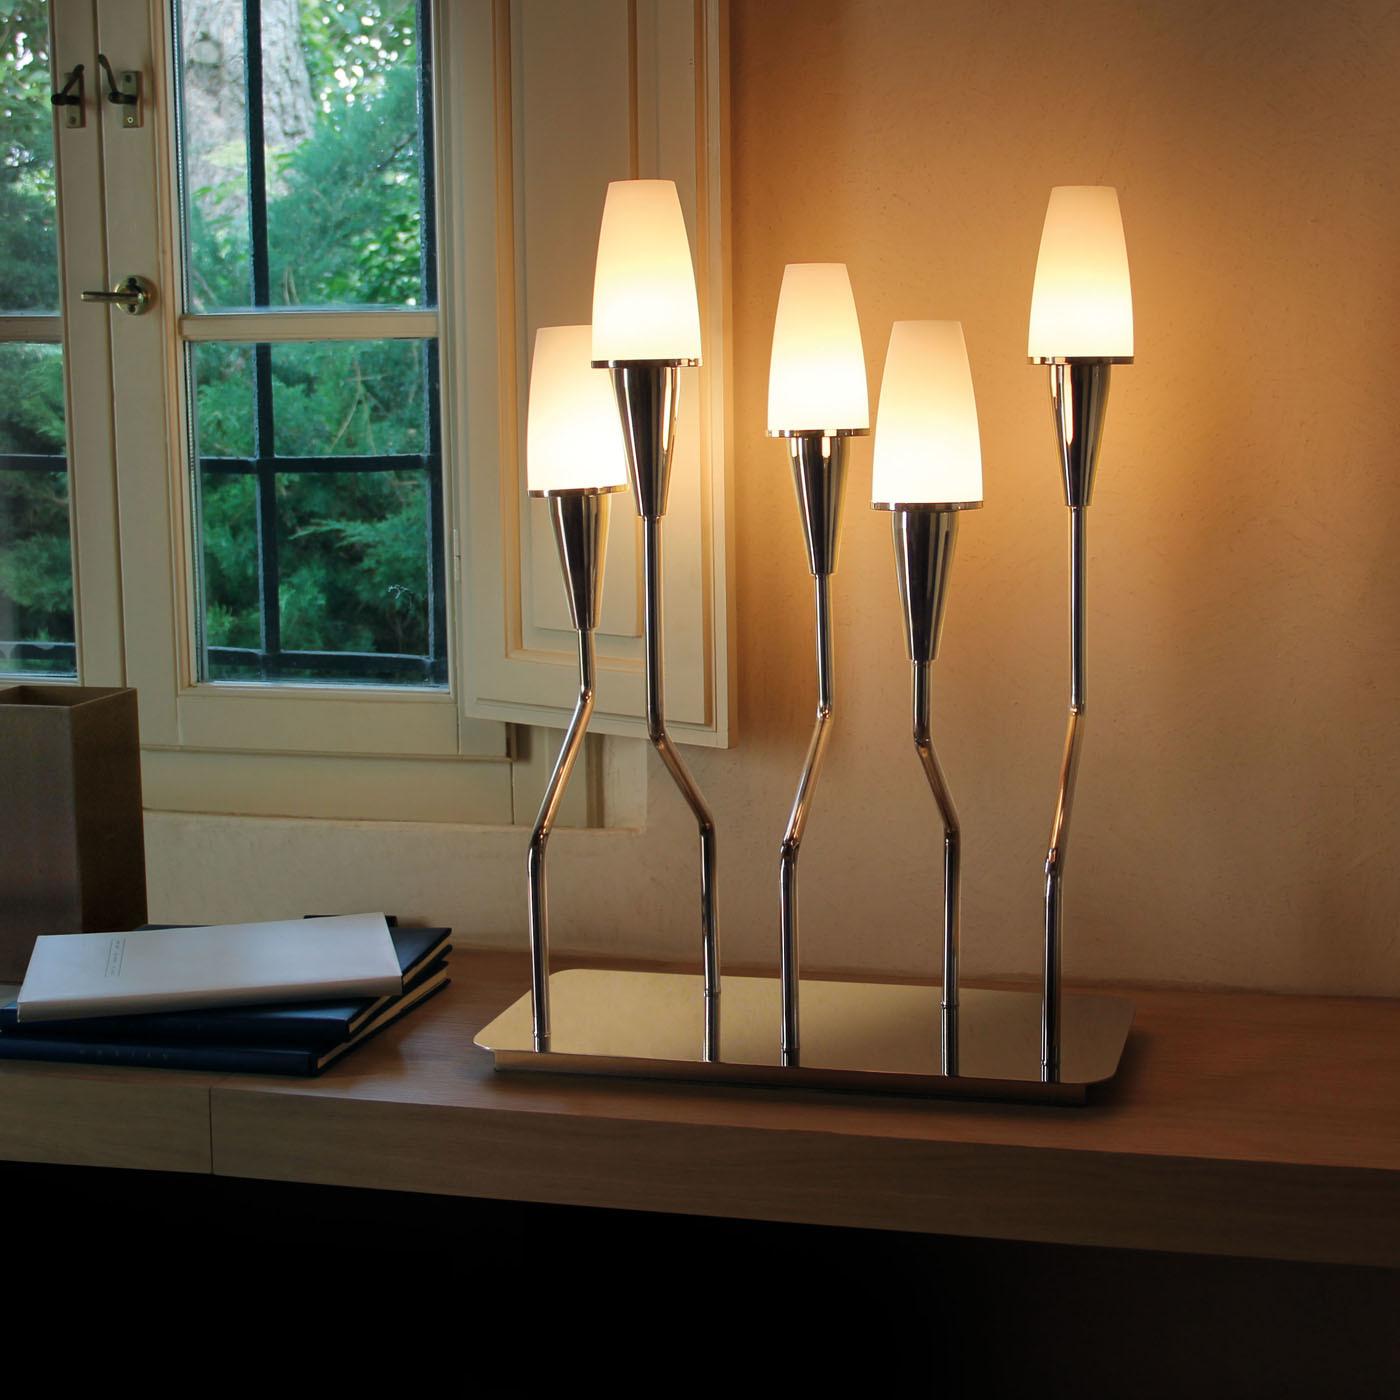 The dynamic design of the Gio table lamp brings a sophisticated and innovative element to the contemporary style decor in your home. The polished nickel brass base and arms combine beautifully with the diffusers in white acid-etched glass.\nBulbs: 5